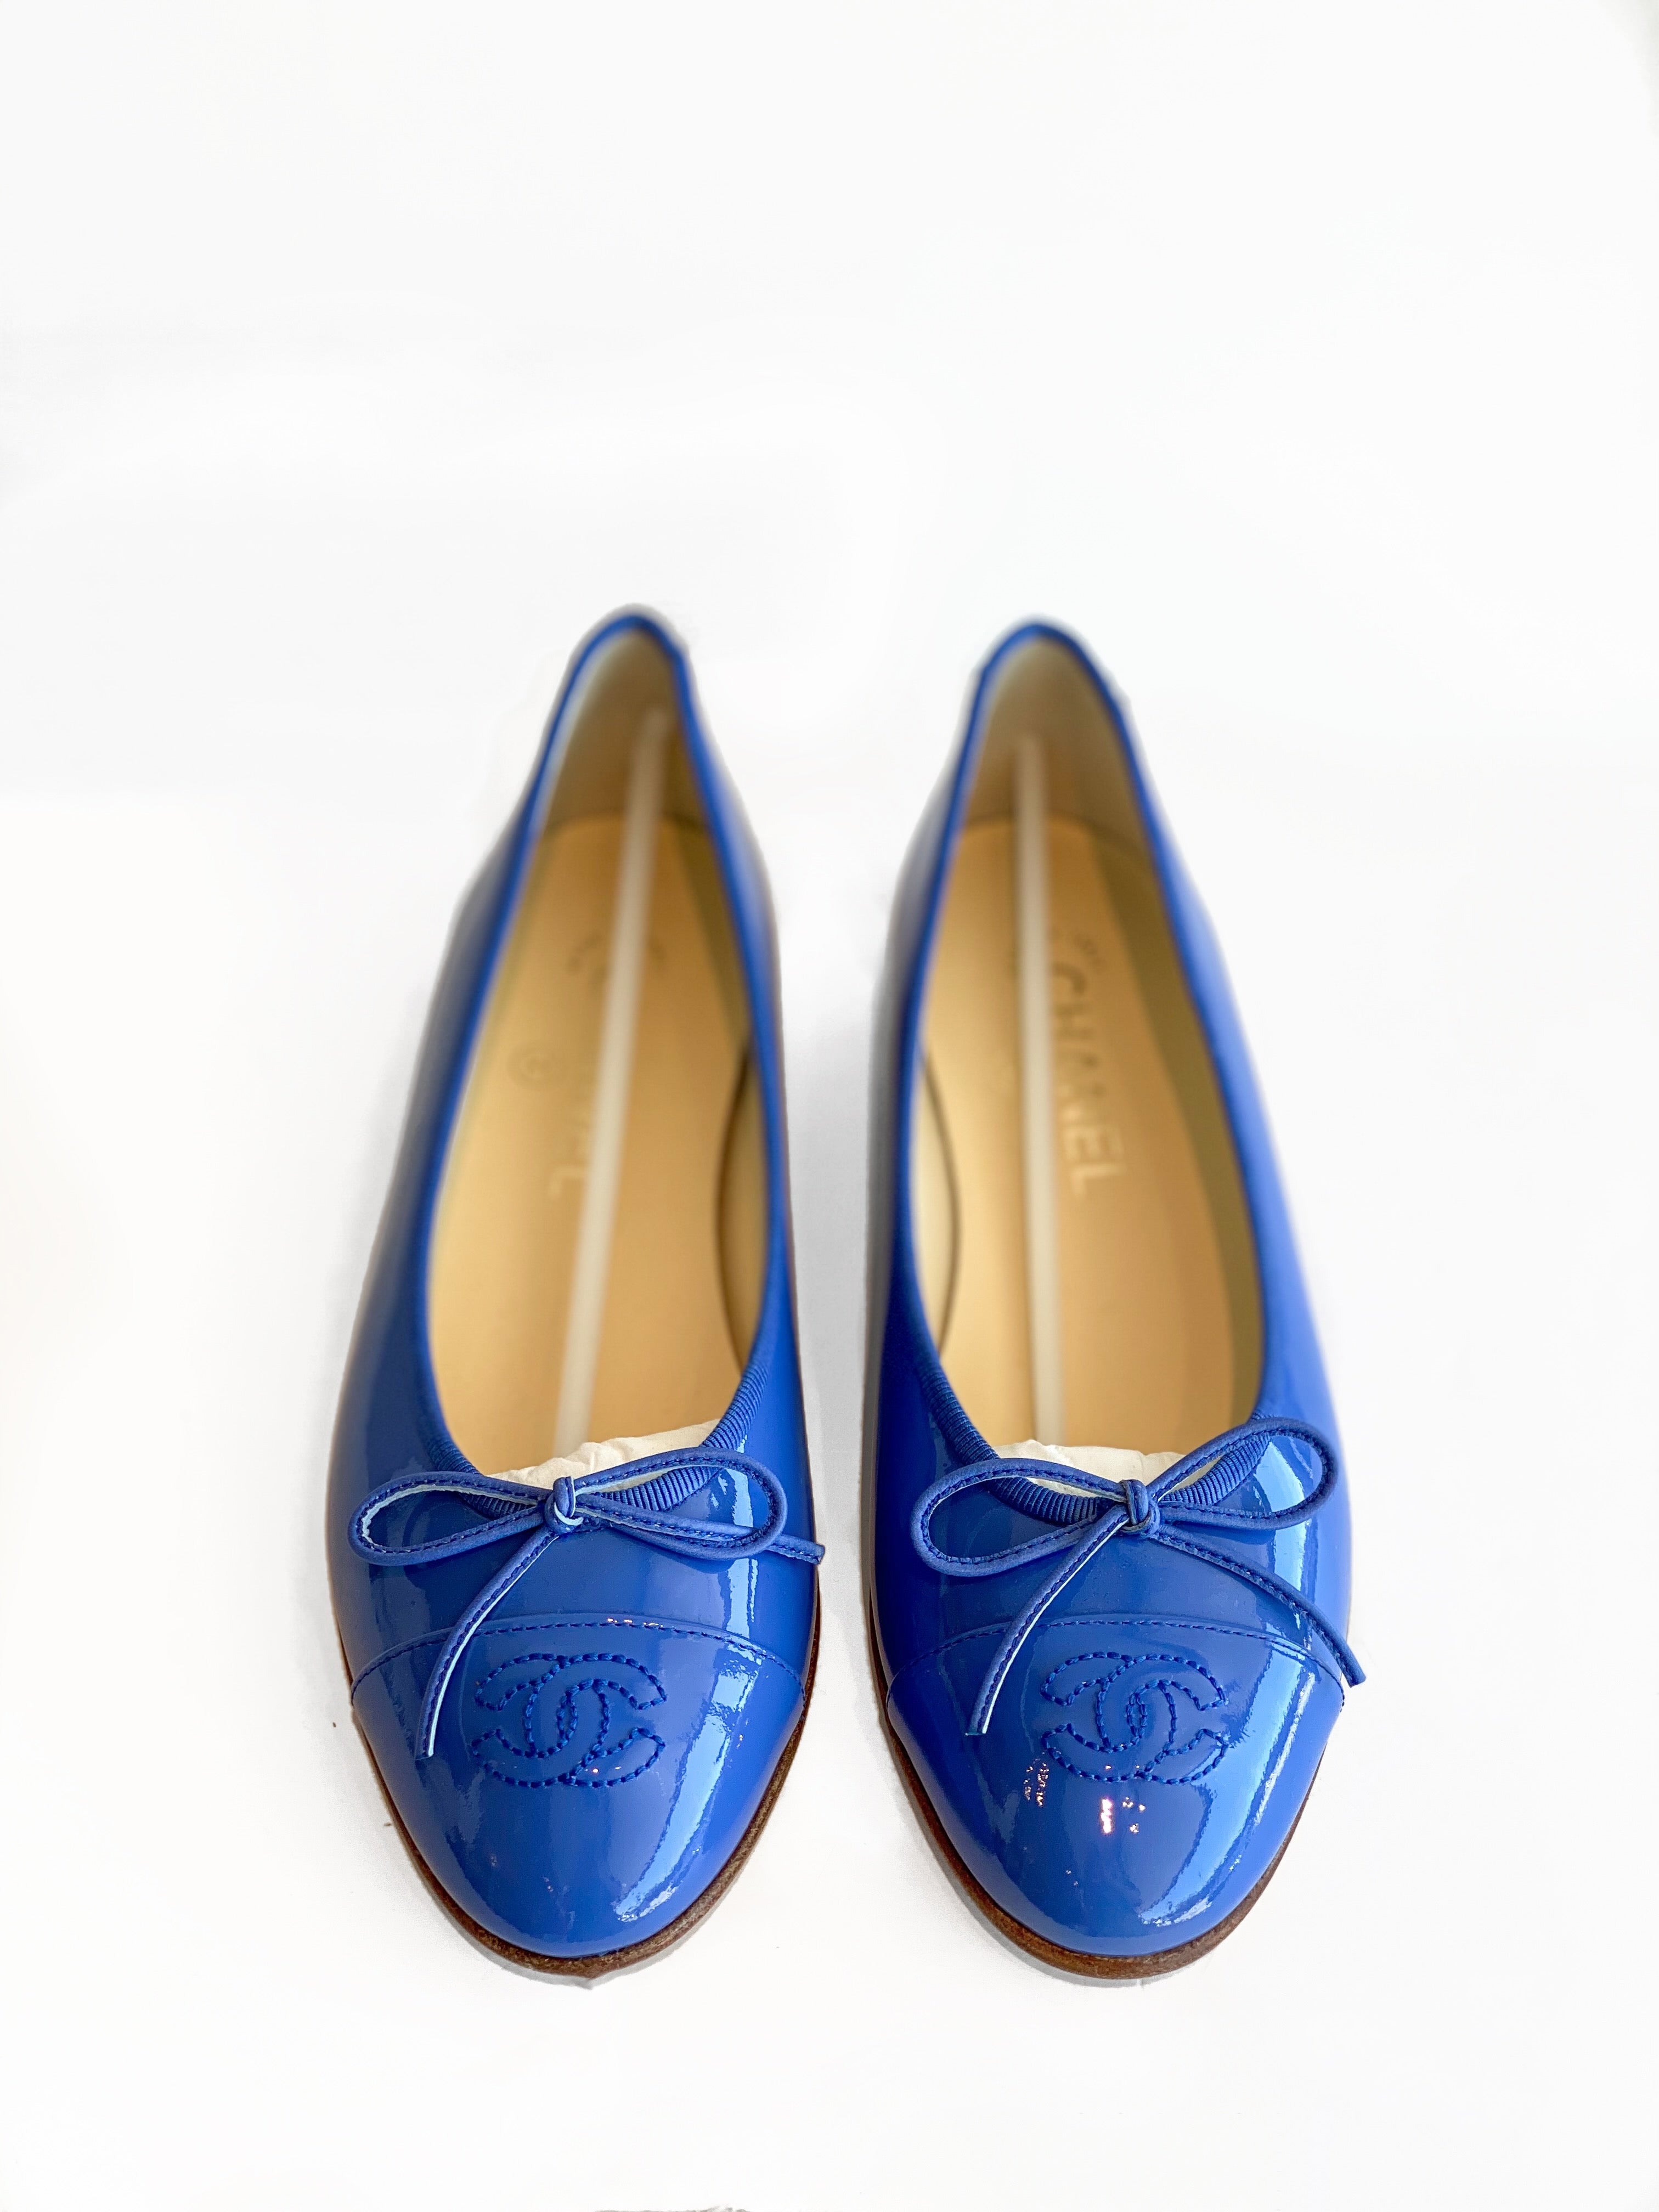 Chanel Patent Ballet Flats - Dress Raleigh Consignment